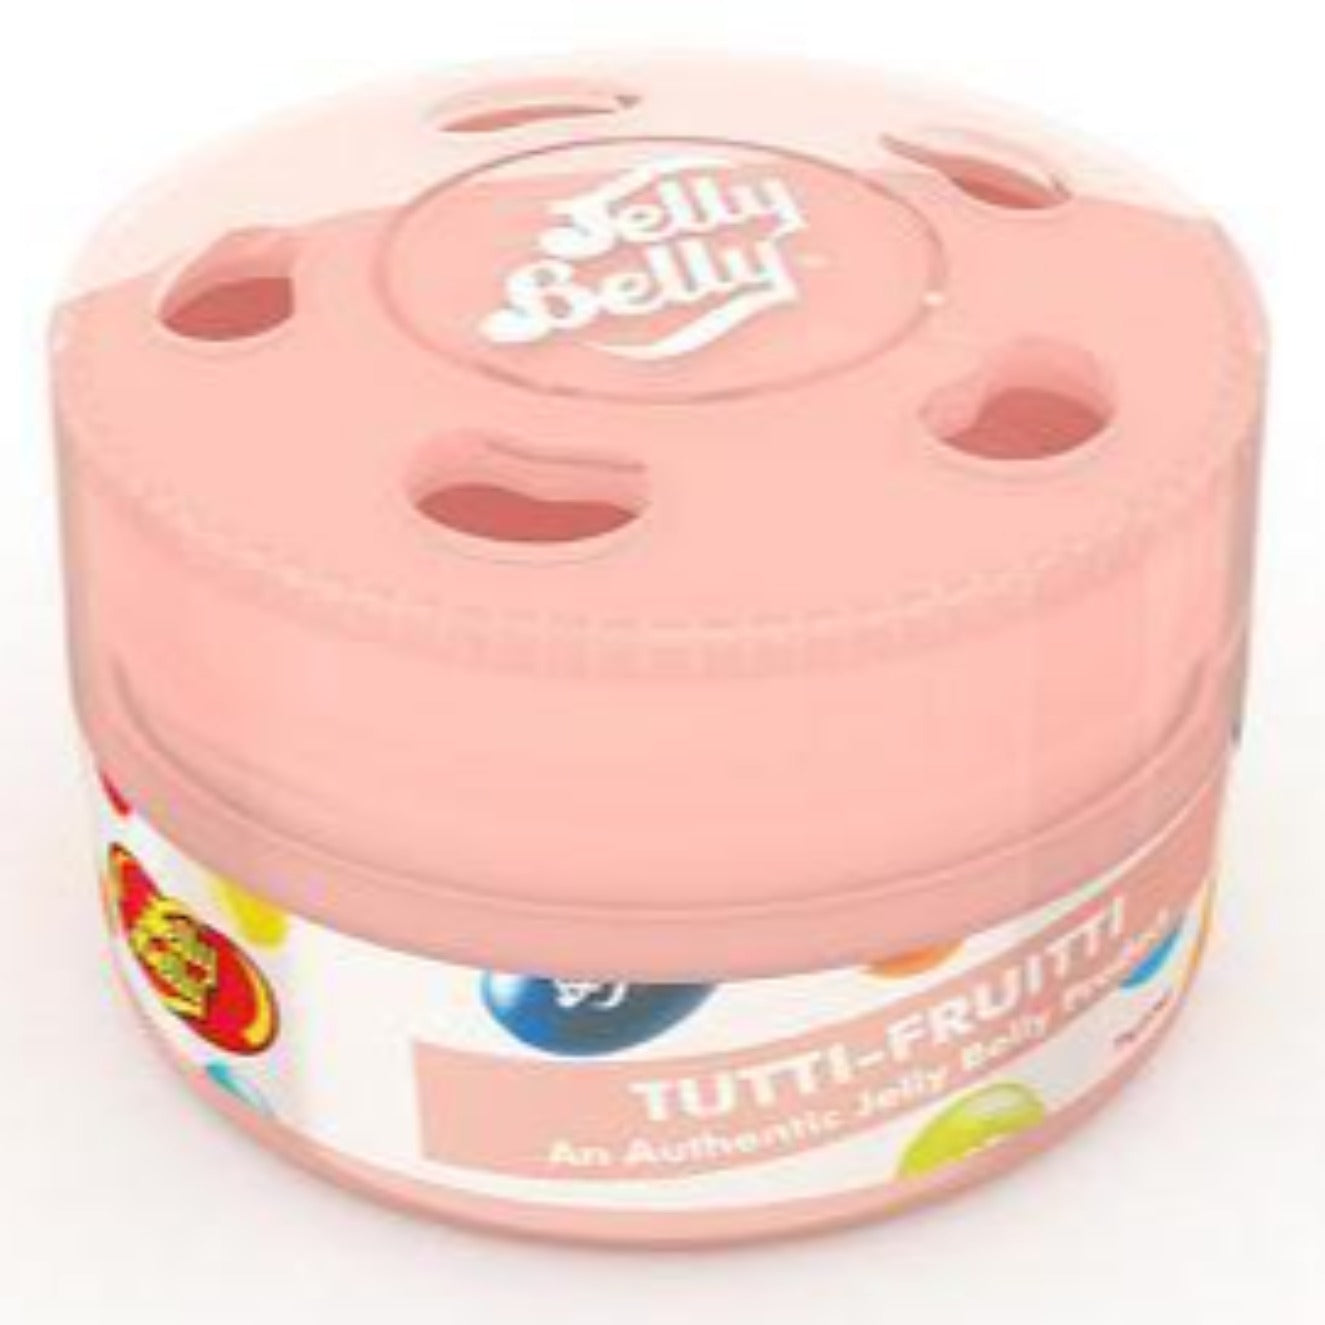 Jelly Belly-Gel Can Air Freshener Tutti Frutti (Made in USA) Alliance Auto Products